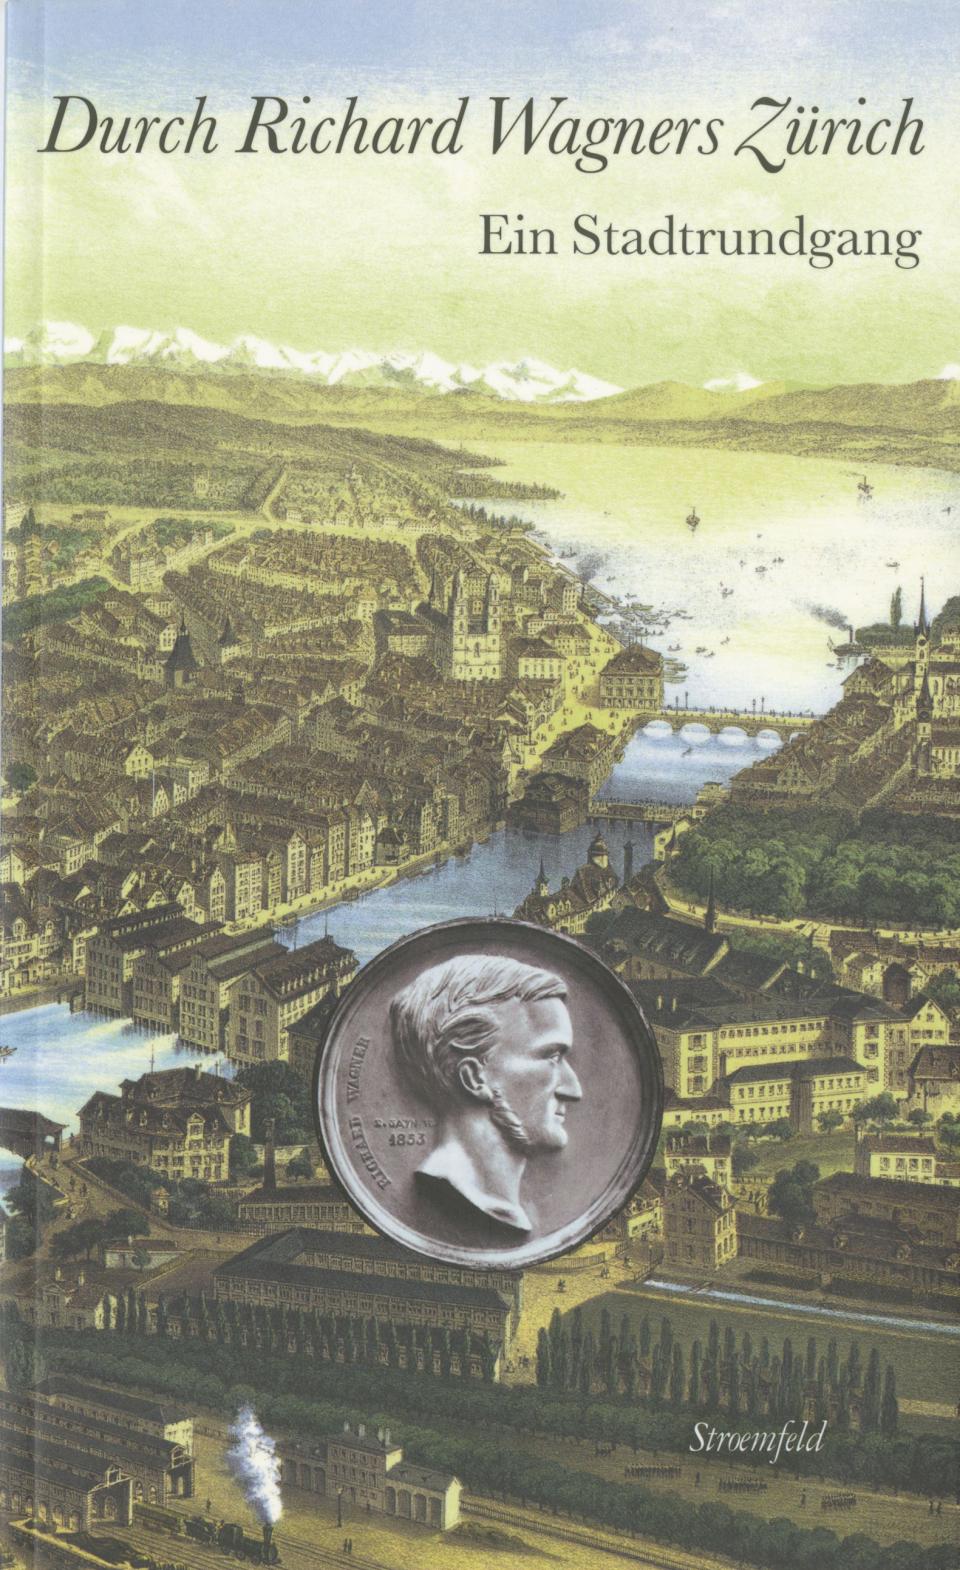 Book cover with an old visual of Zurich 